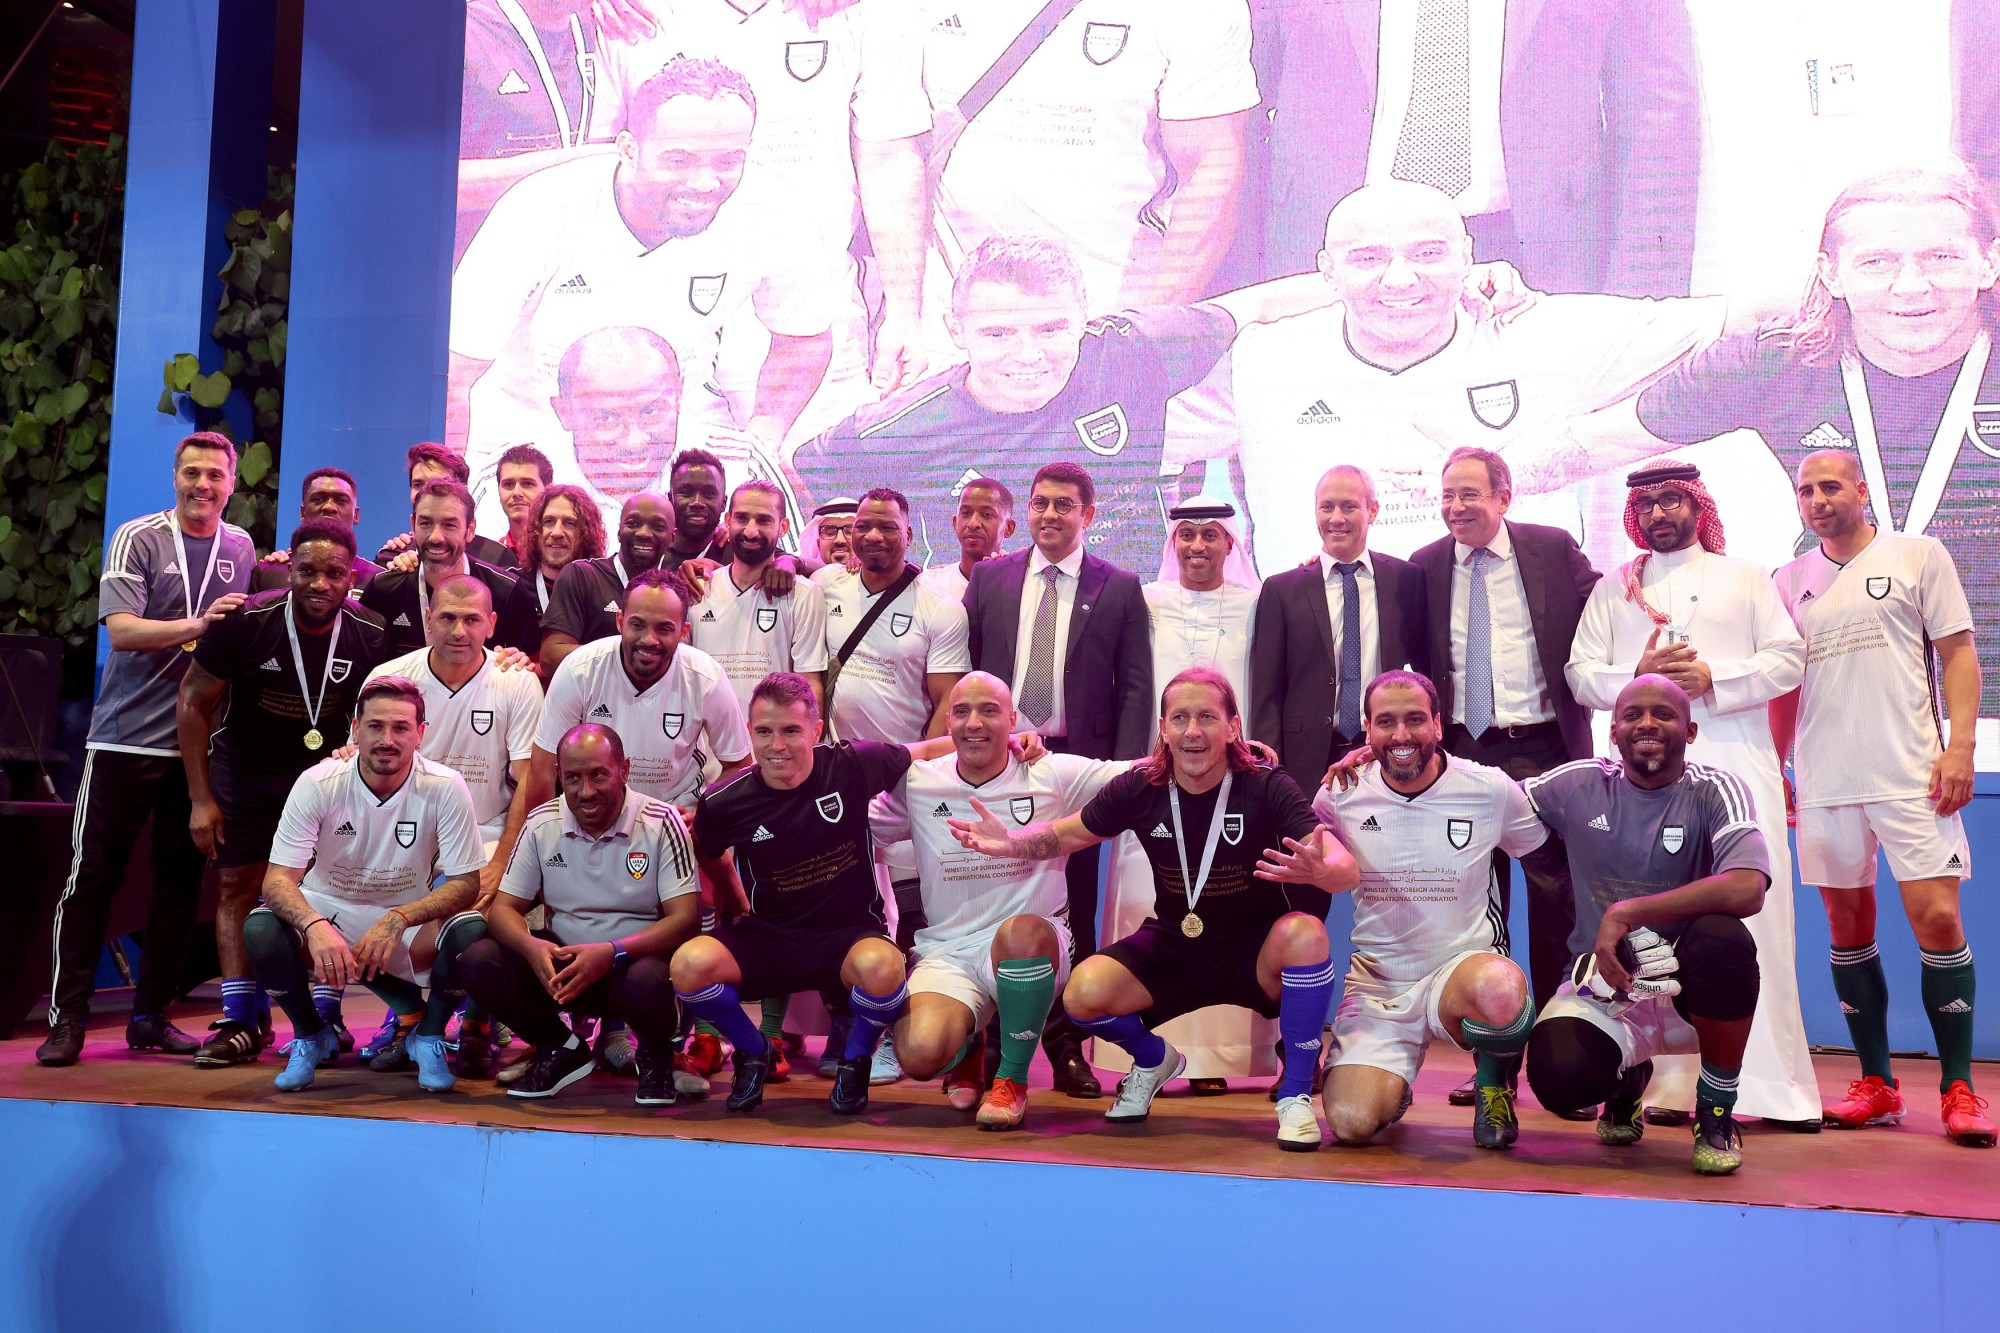 Exhibition match winners World Classic, Abraham Accords team members, His Excellency Dr Ahmad Belhoul Al Falasi (TR5), UAE Minister of State for Entrepreneurship and SMEs, His Excellency Mohamed Bensaid (TR6), Moroccan Minister of Culture, Y